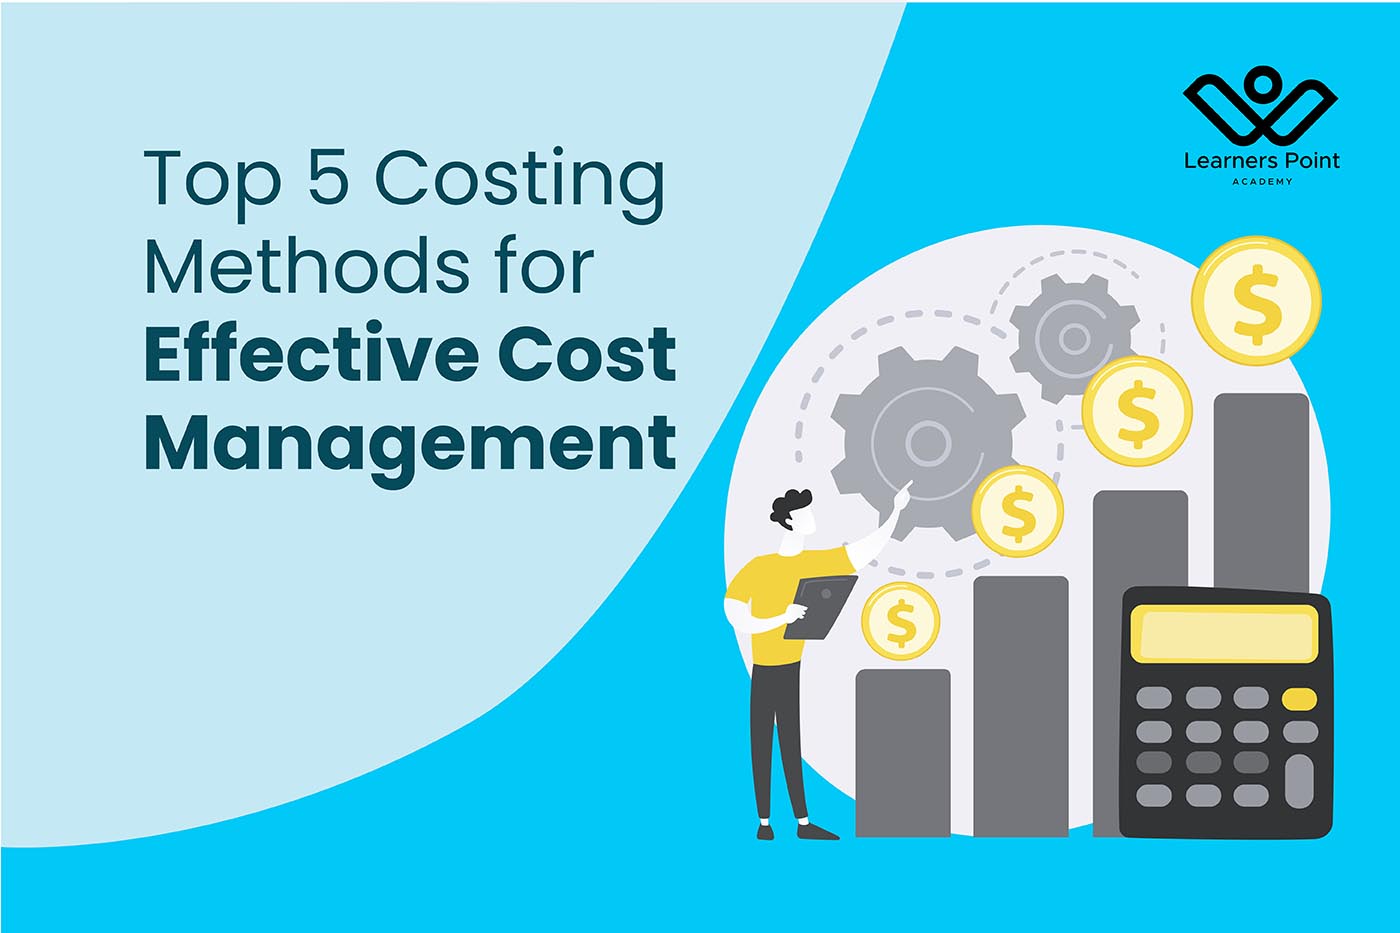 Top 5 Costing Methods for Effective Cost Management